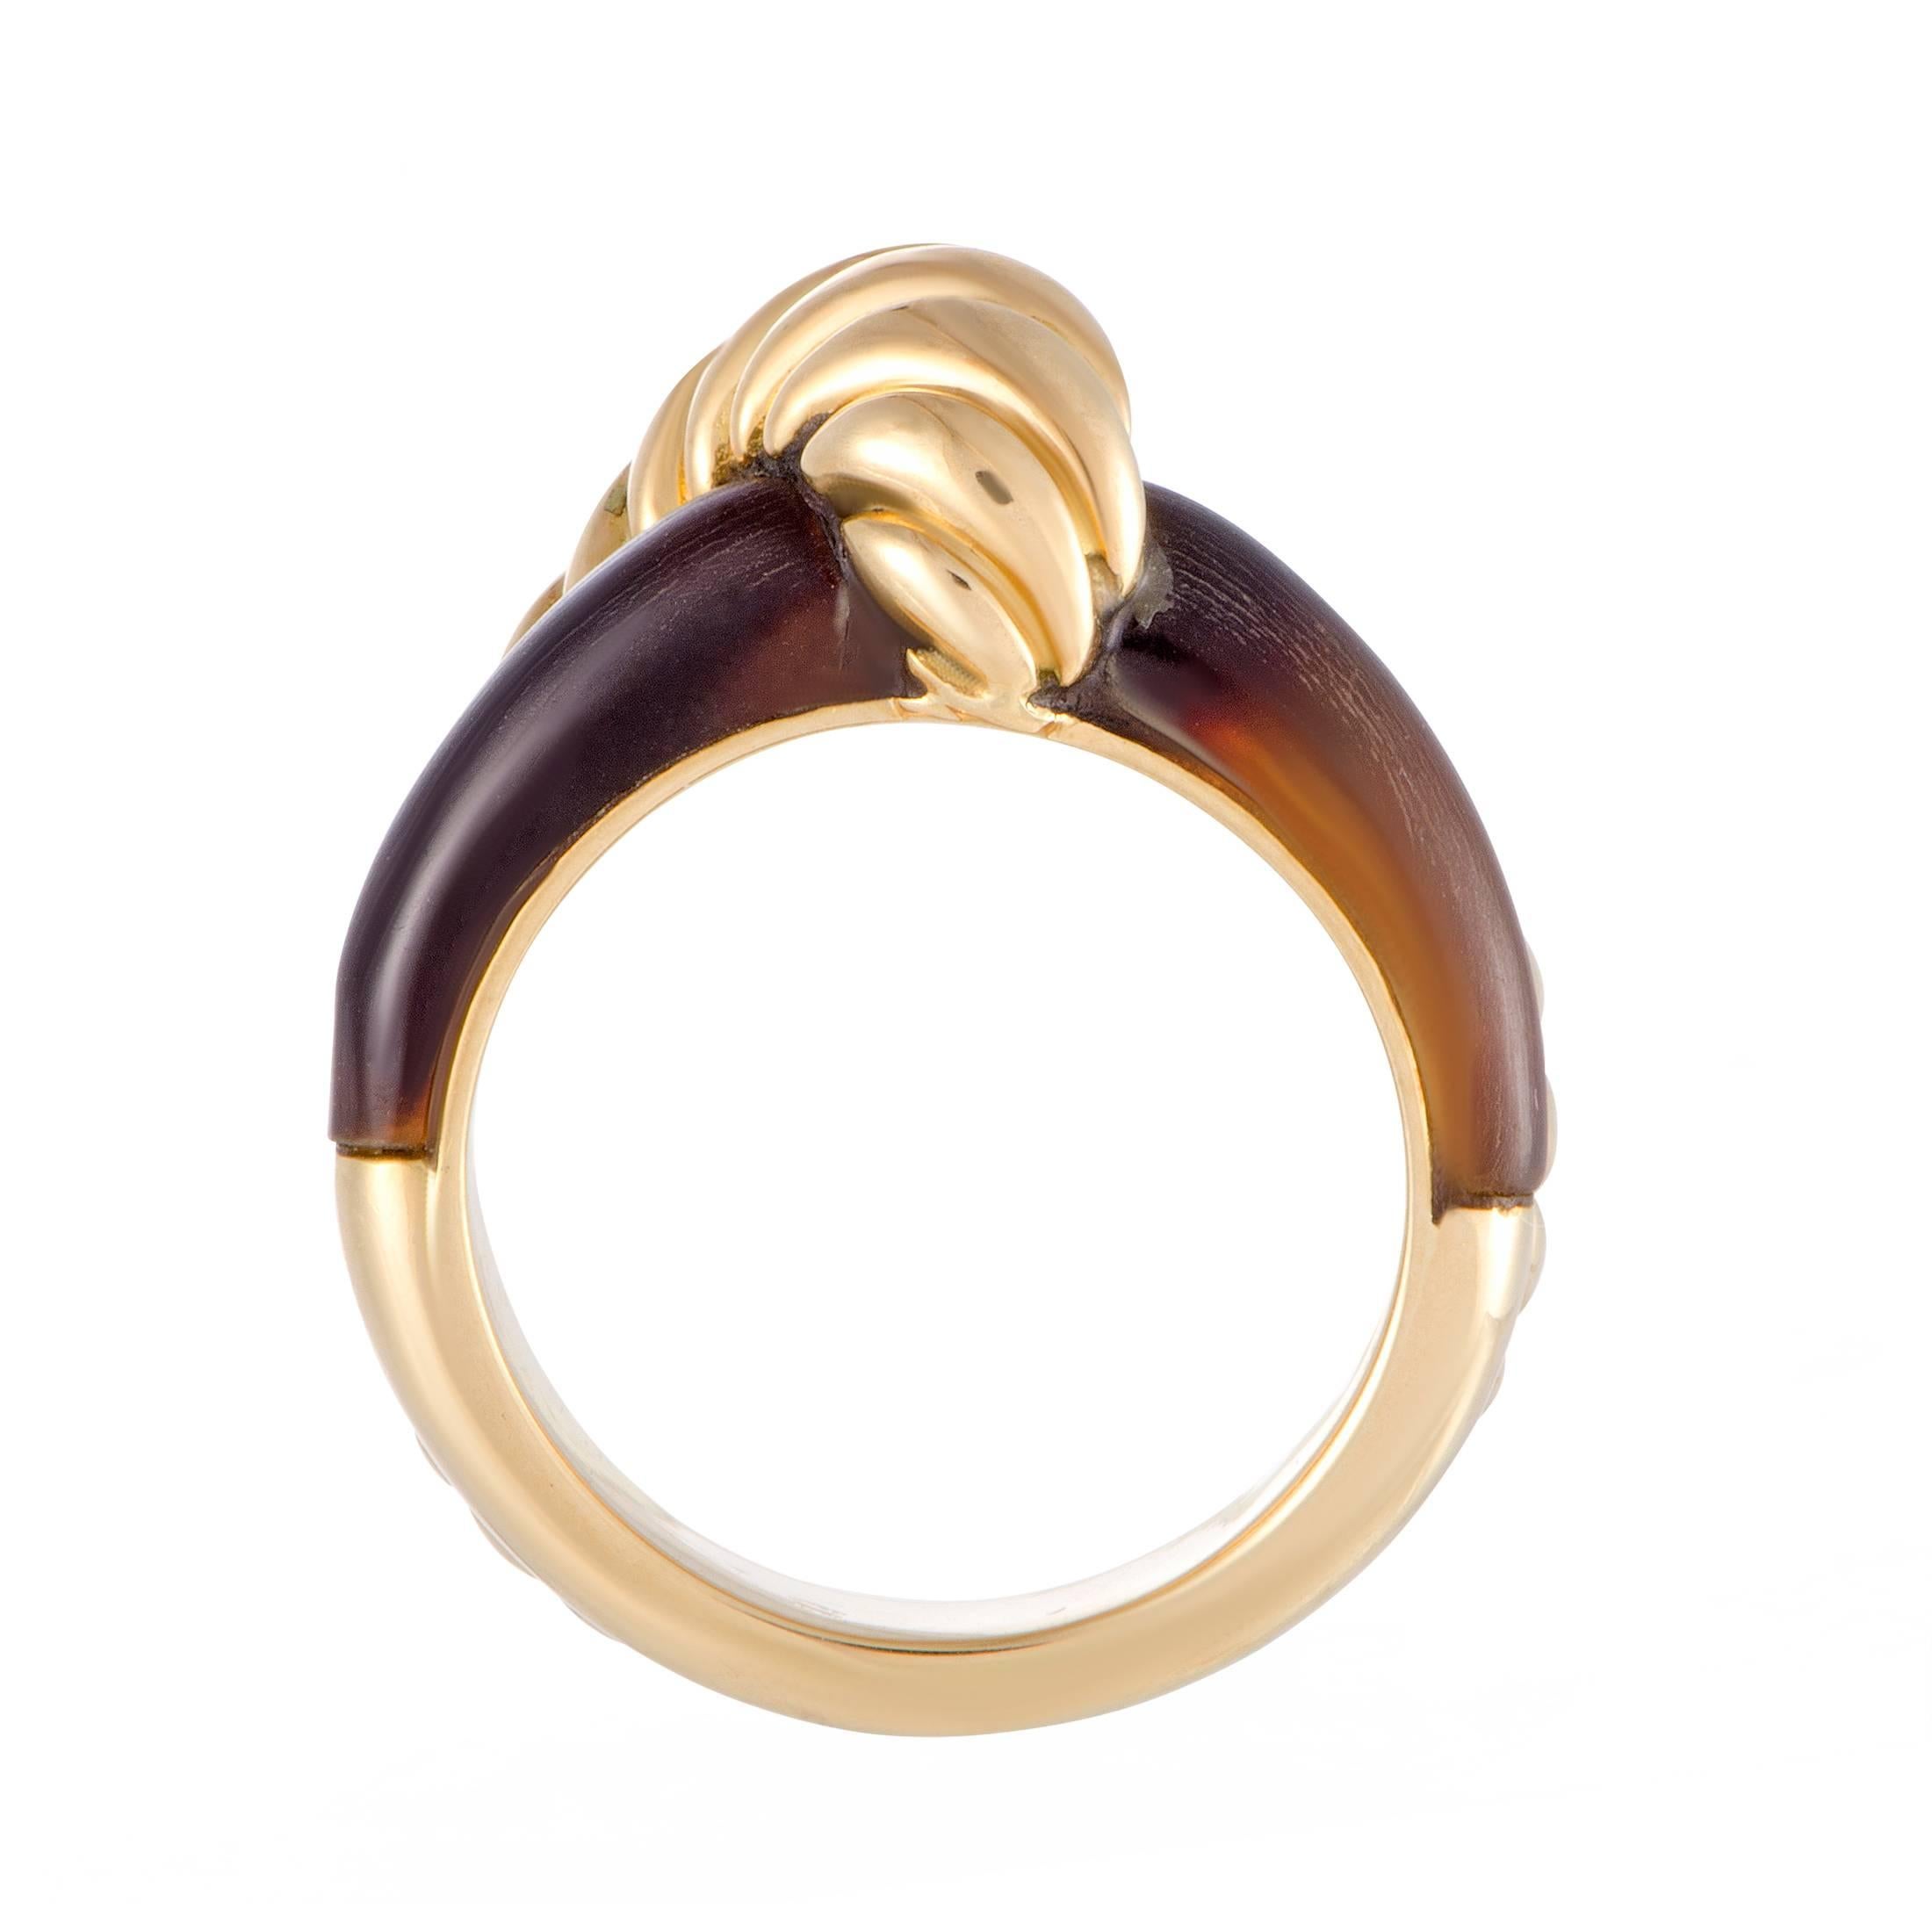 The sophisticated nuance of tiger's eye stone is complemented in wonderful fashion by the luxurious glisten of 18K yellow gold in this splendid ring designed by Hermes that boasts an exceptionally classy appeal.
Ring Size: 5.25
Ring Top Dimensions: